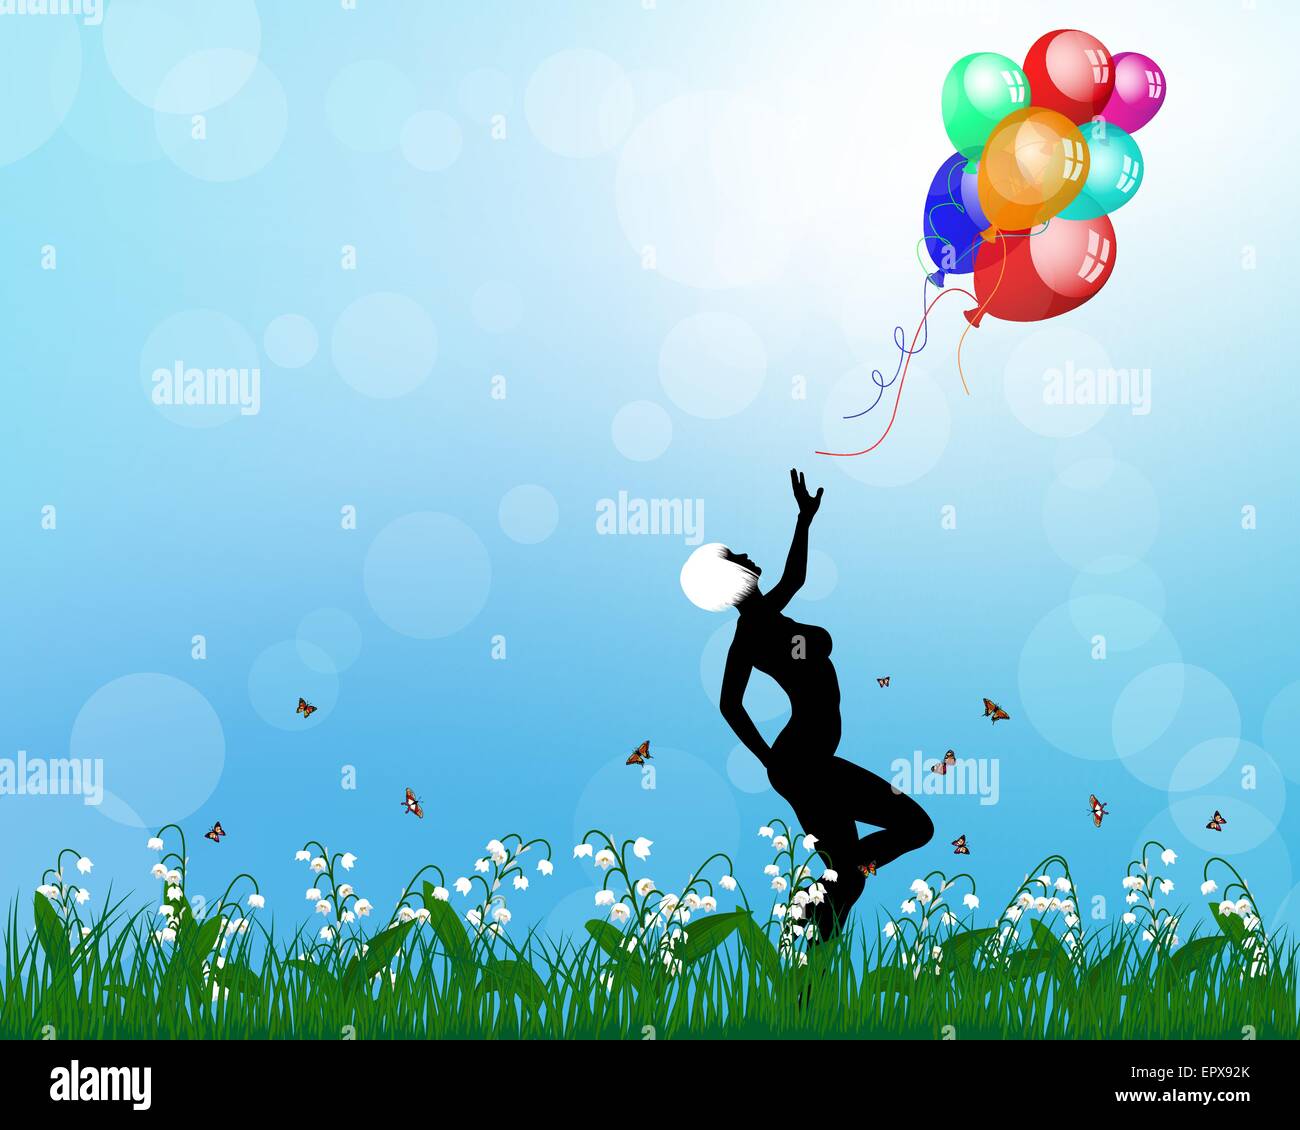 Lady playing with balloons. EPS 10 vector illustration with transparency and mesh. Stock Vector